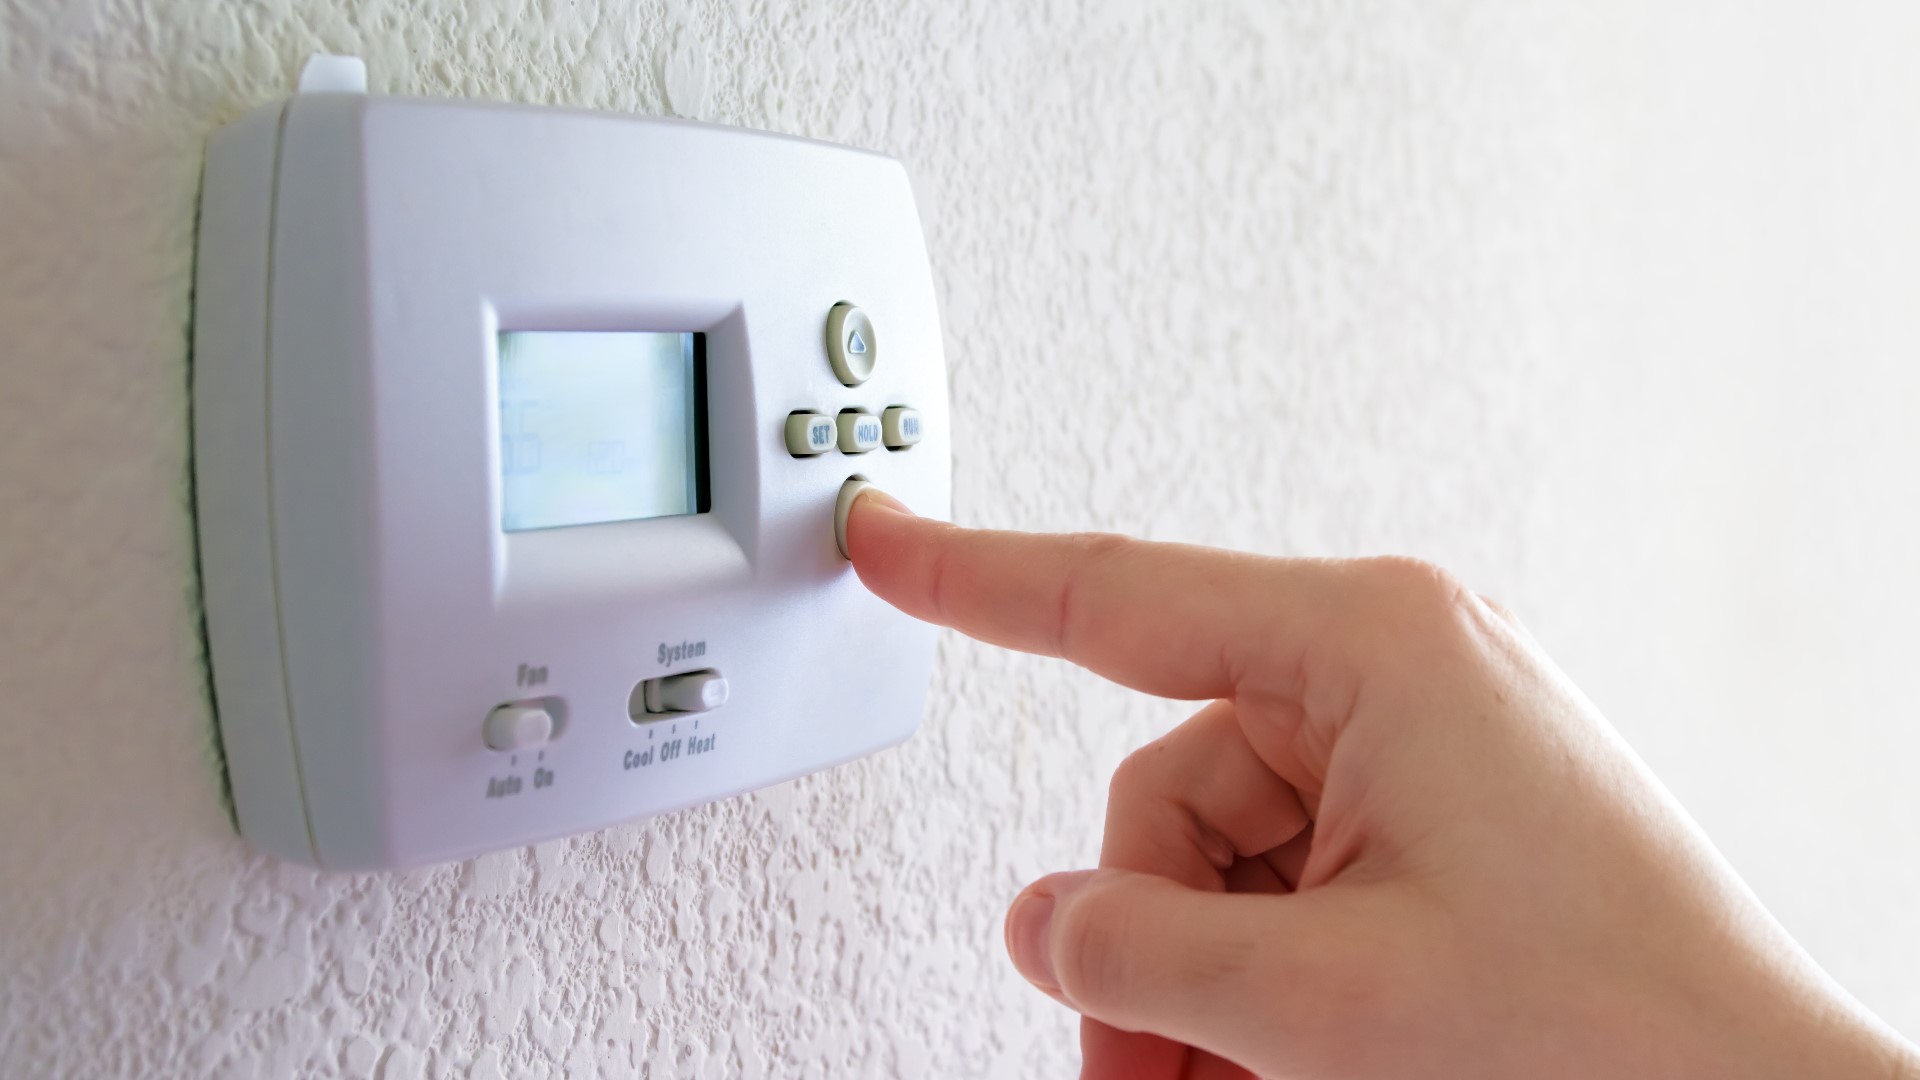 As temperatures drop, your heating bill goes up. And while we still have a way to go before it freezes, experts say this winter could be the most expensive yet.